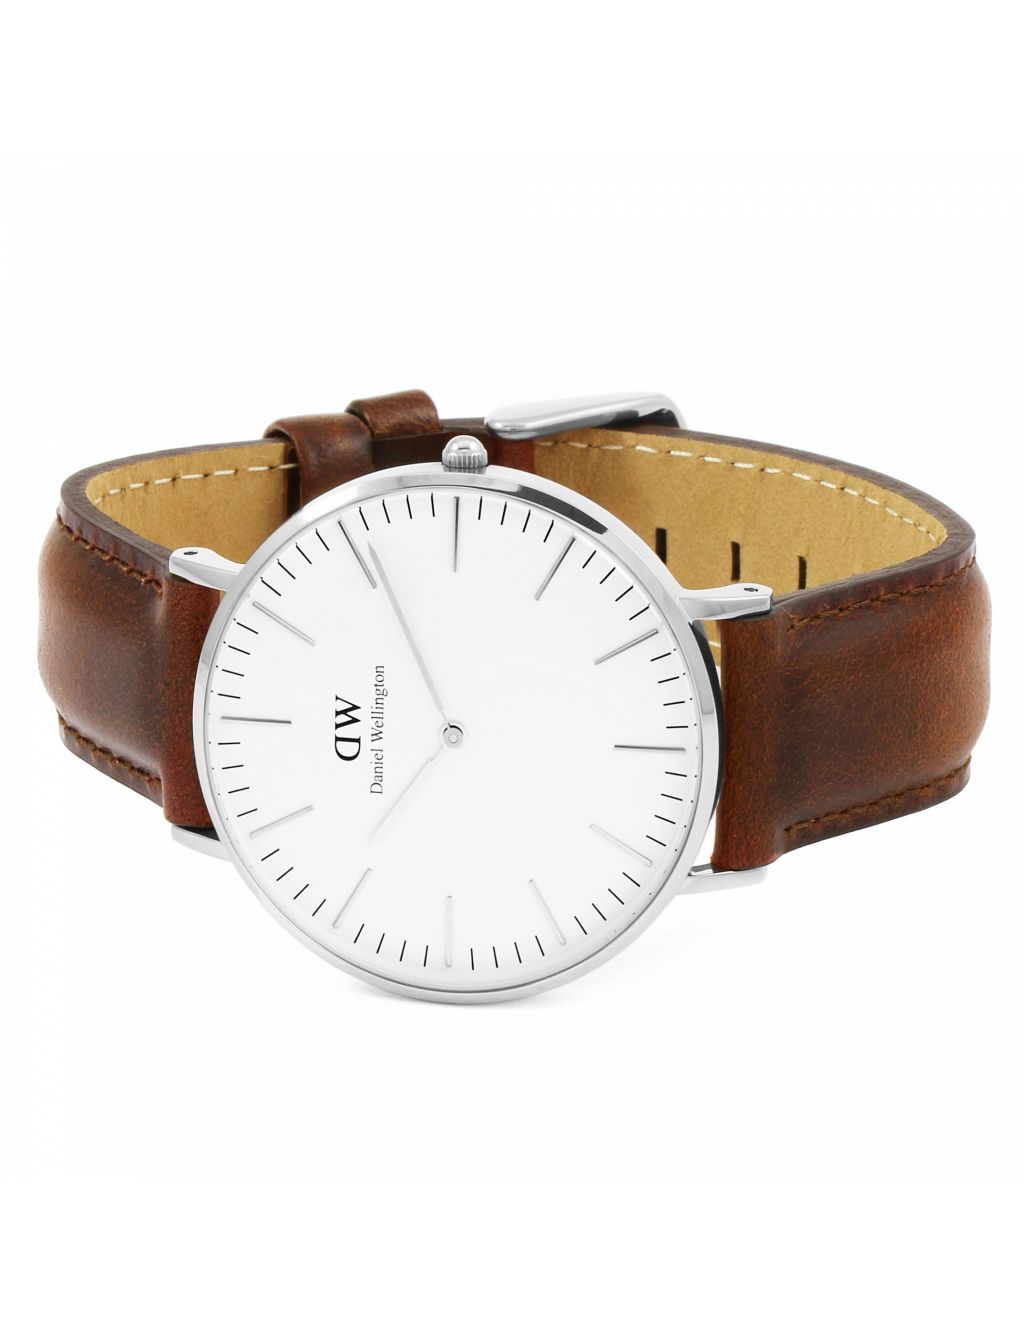 Daniel Wellington St Mawes Brown Leather Watch image 4